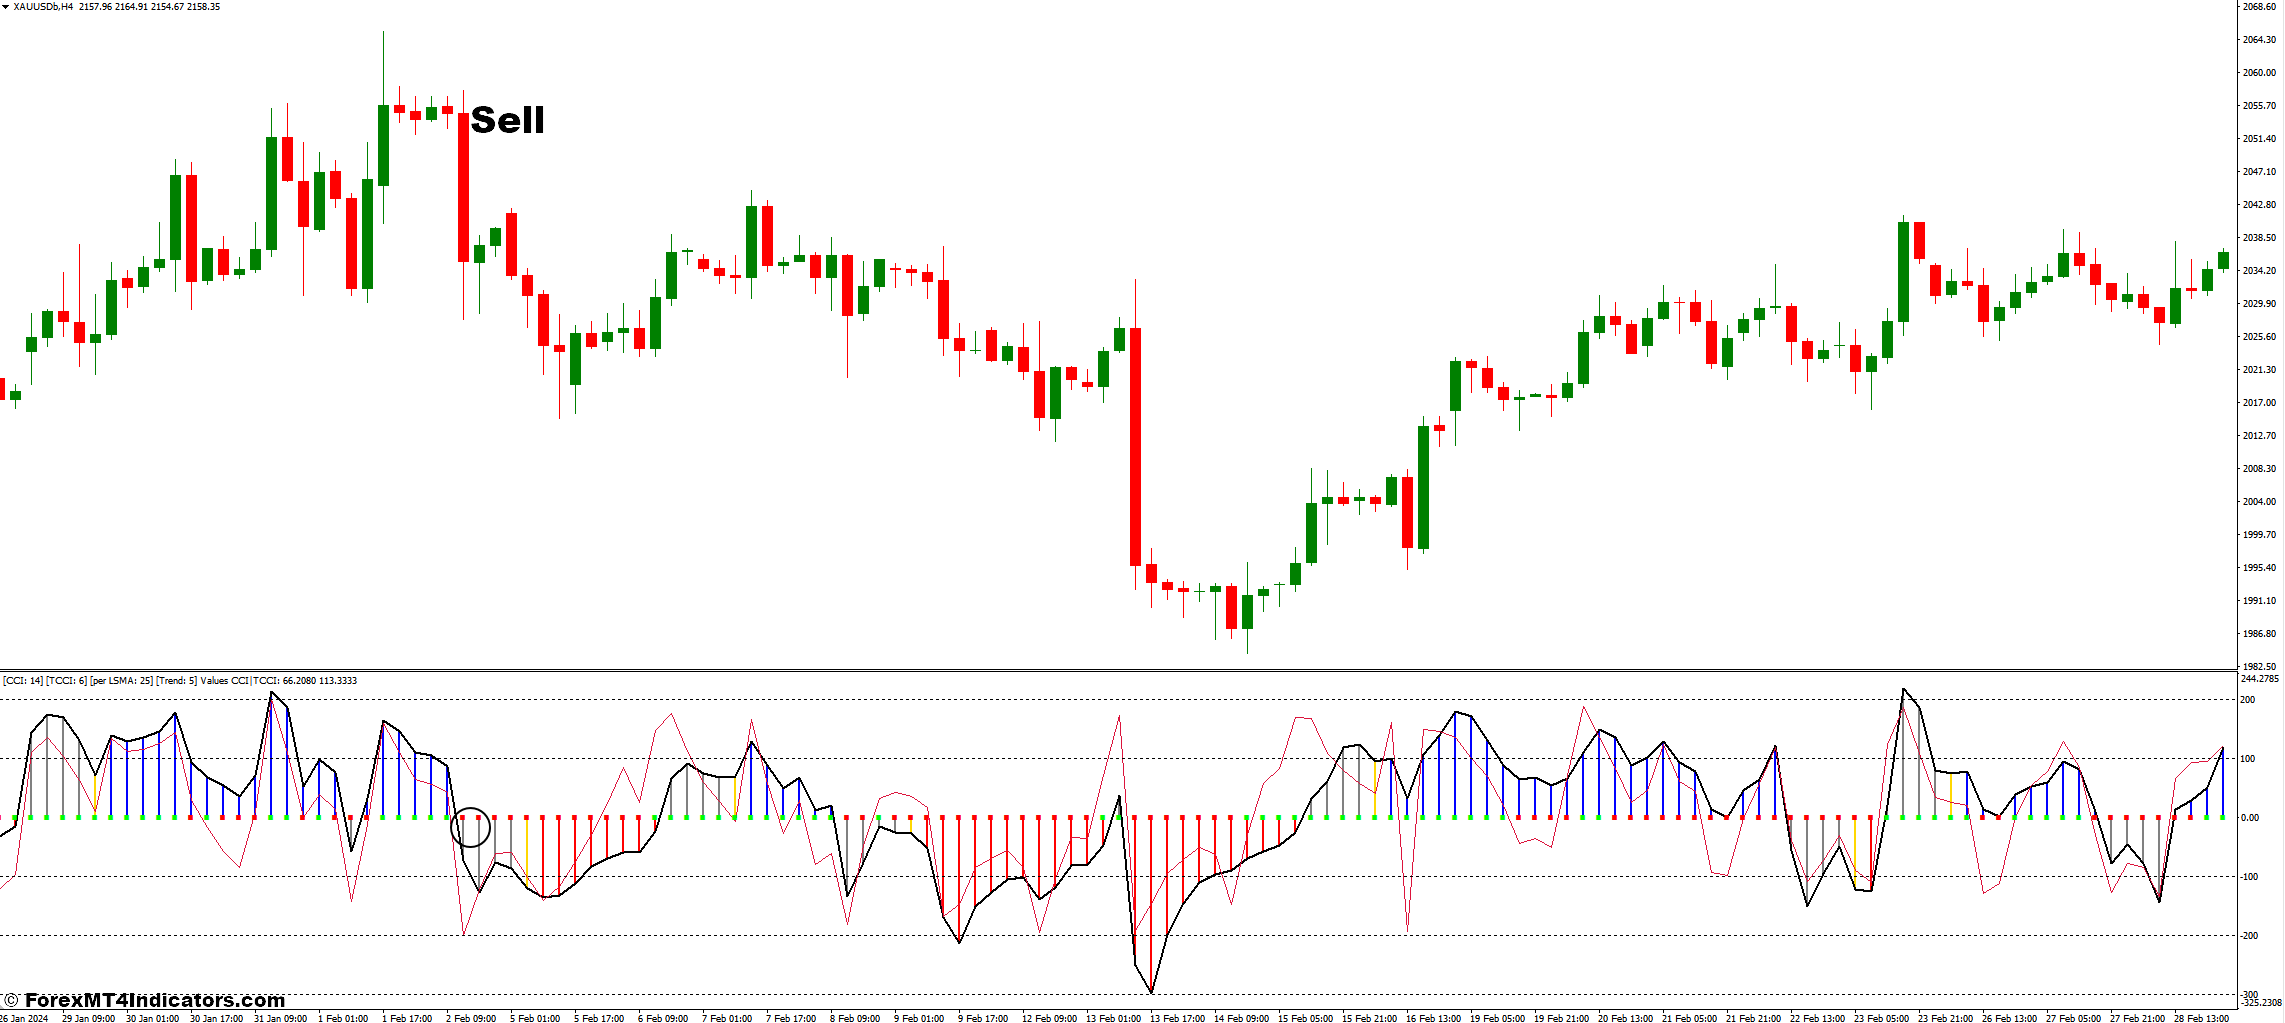 How To Trade With Real Woodie CCI Indicator - Sell Entry